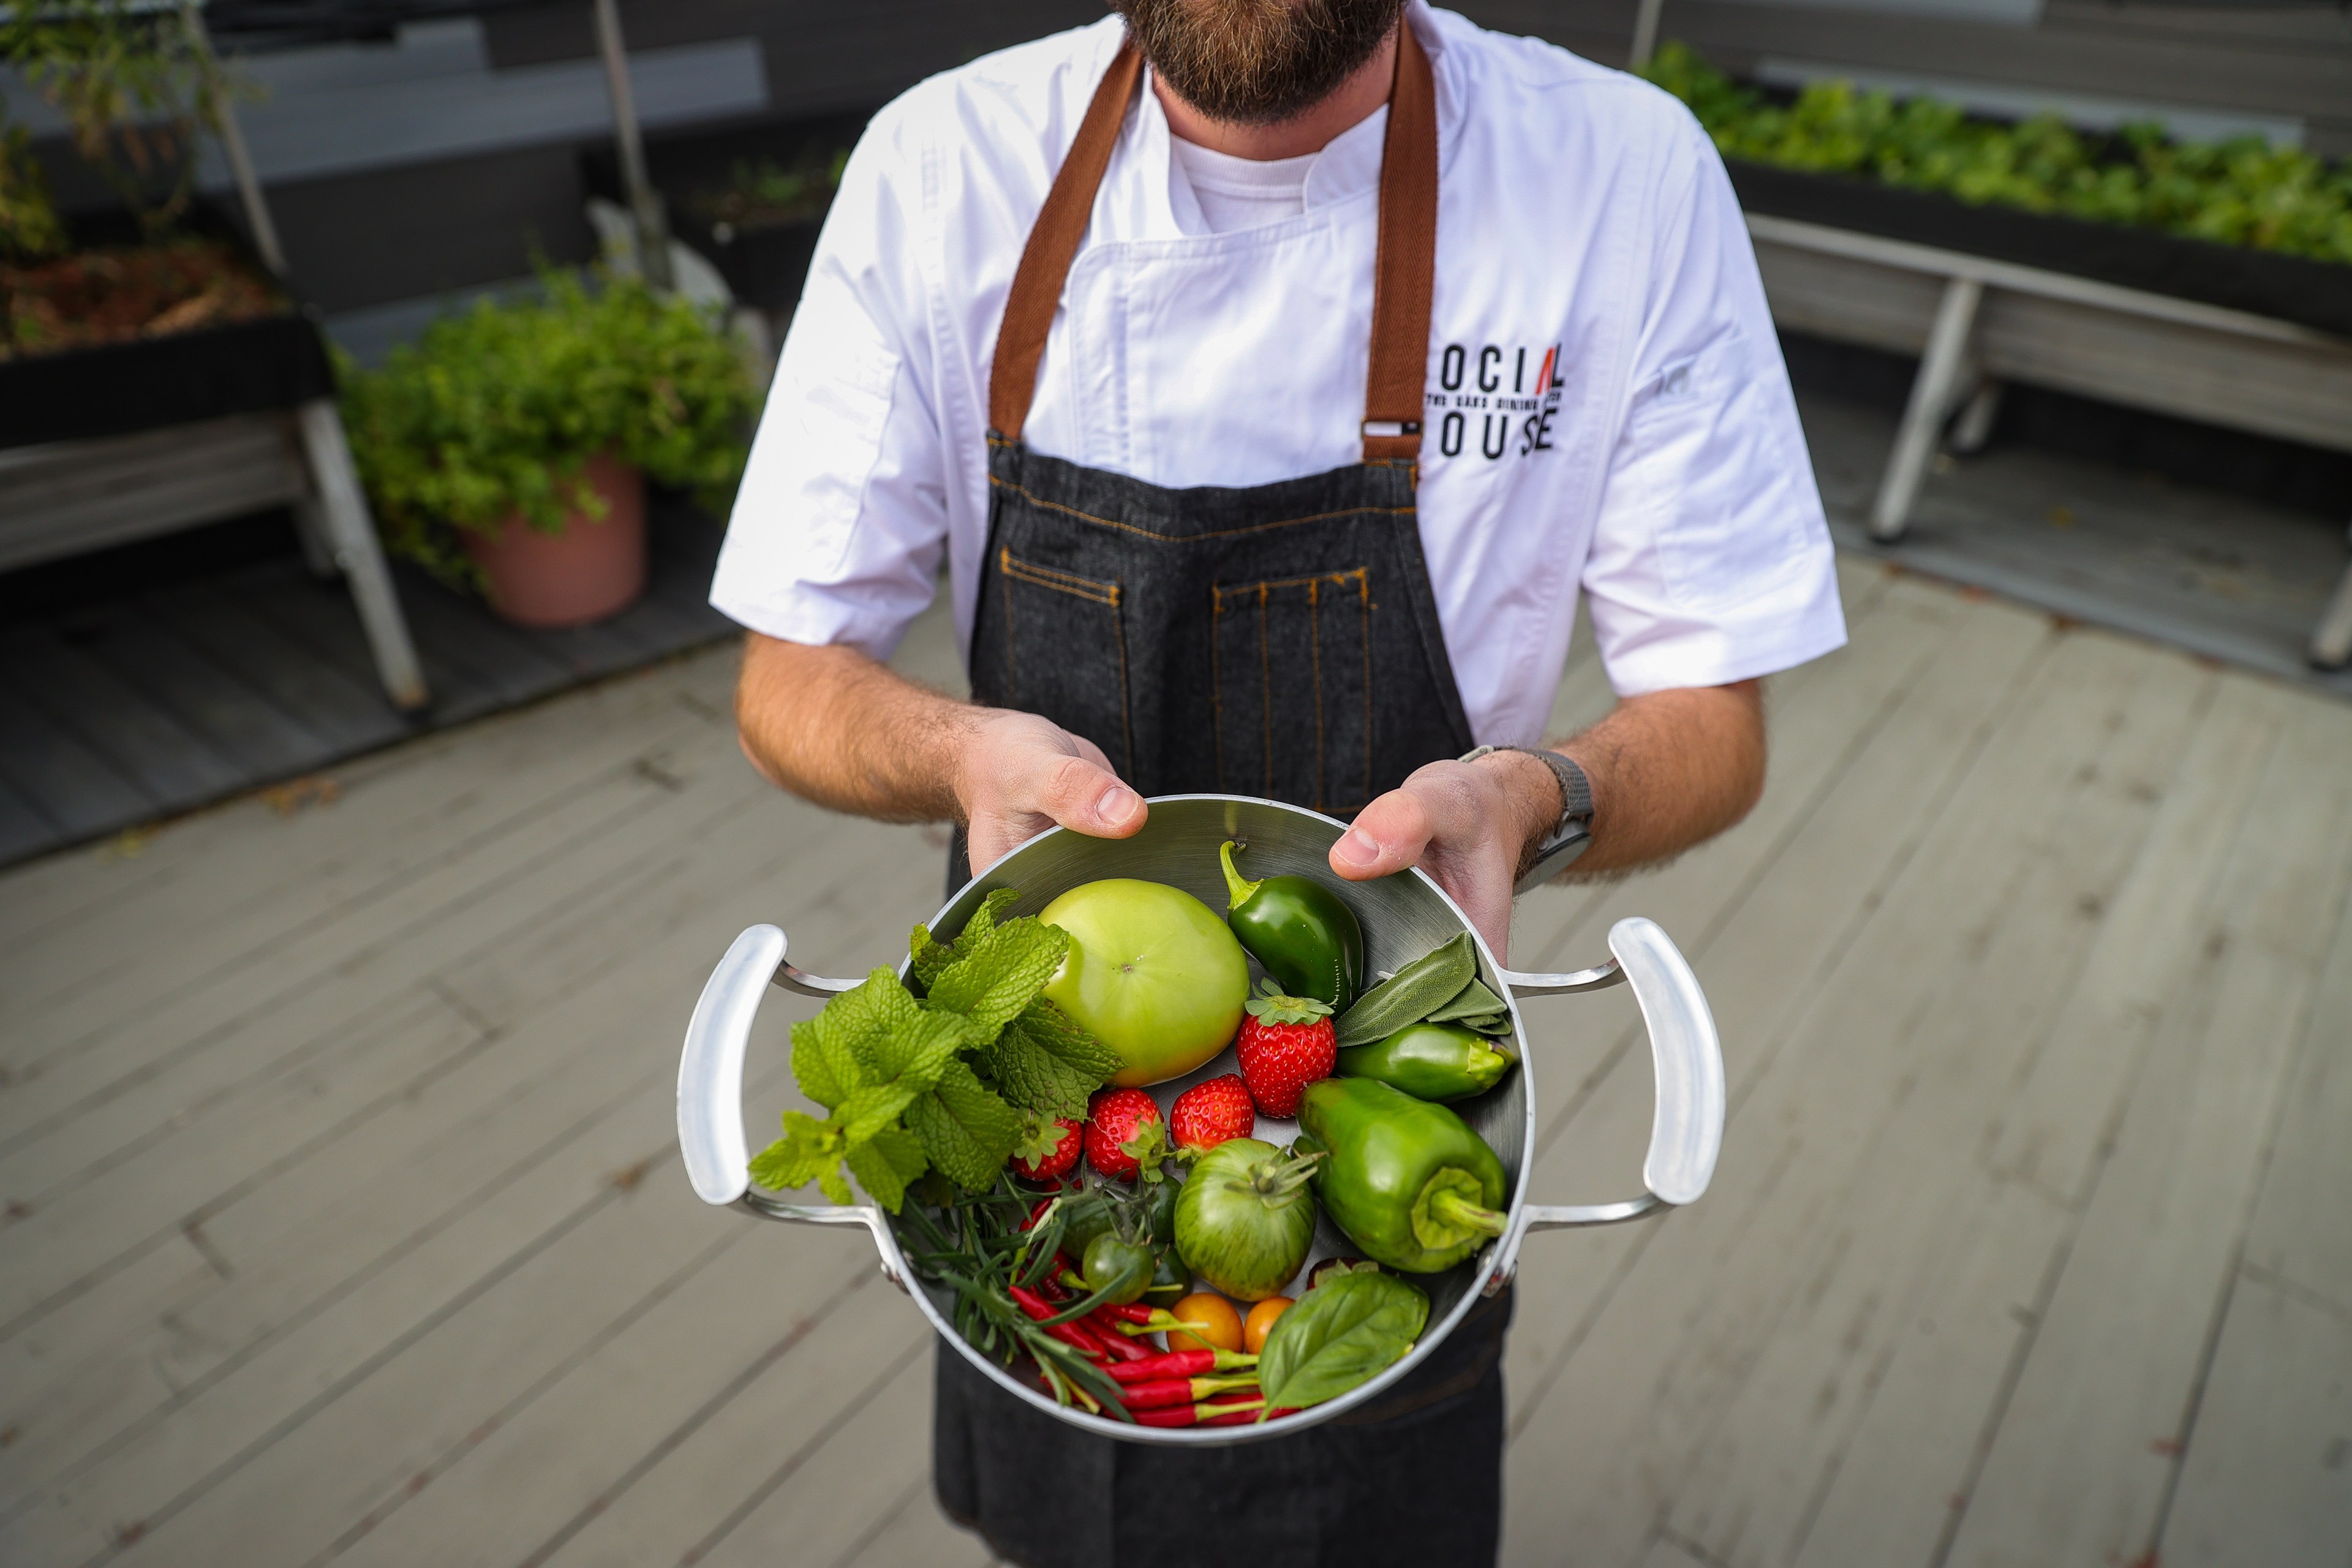 chef holding a bowl of fruits and vegetables